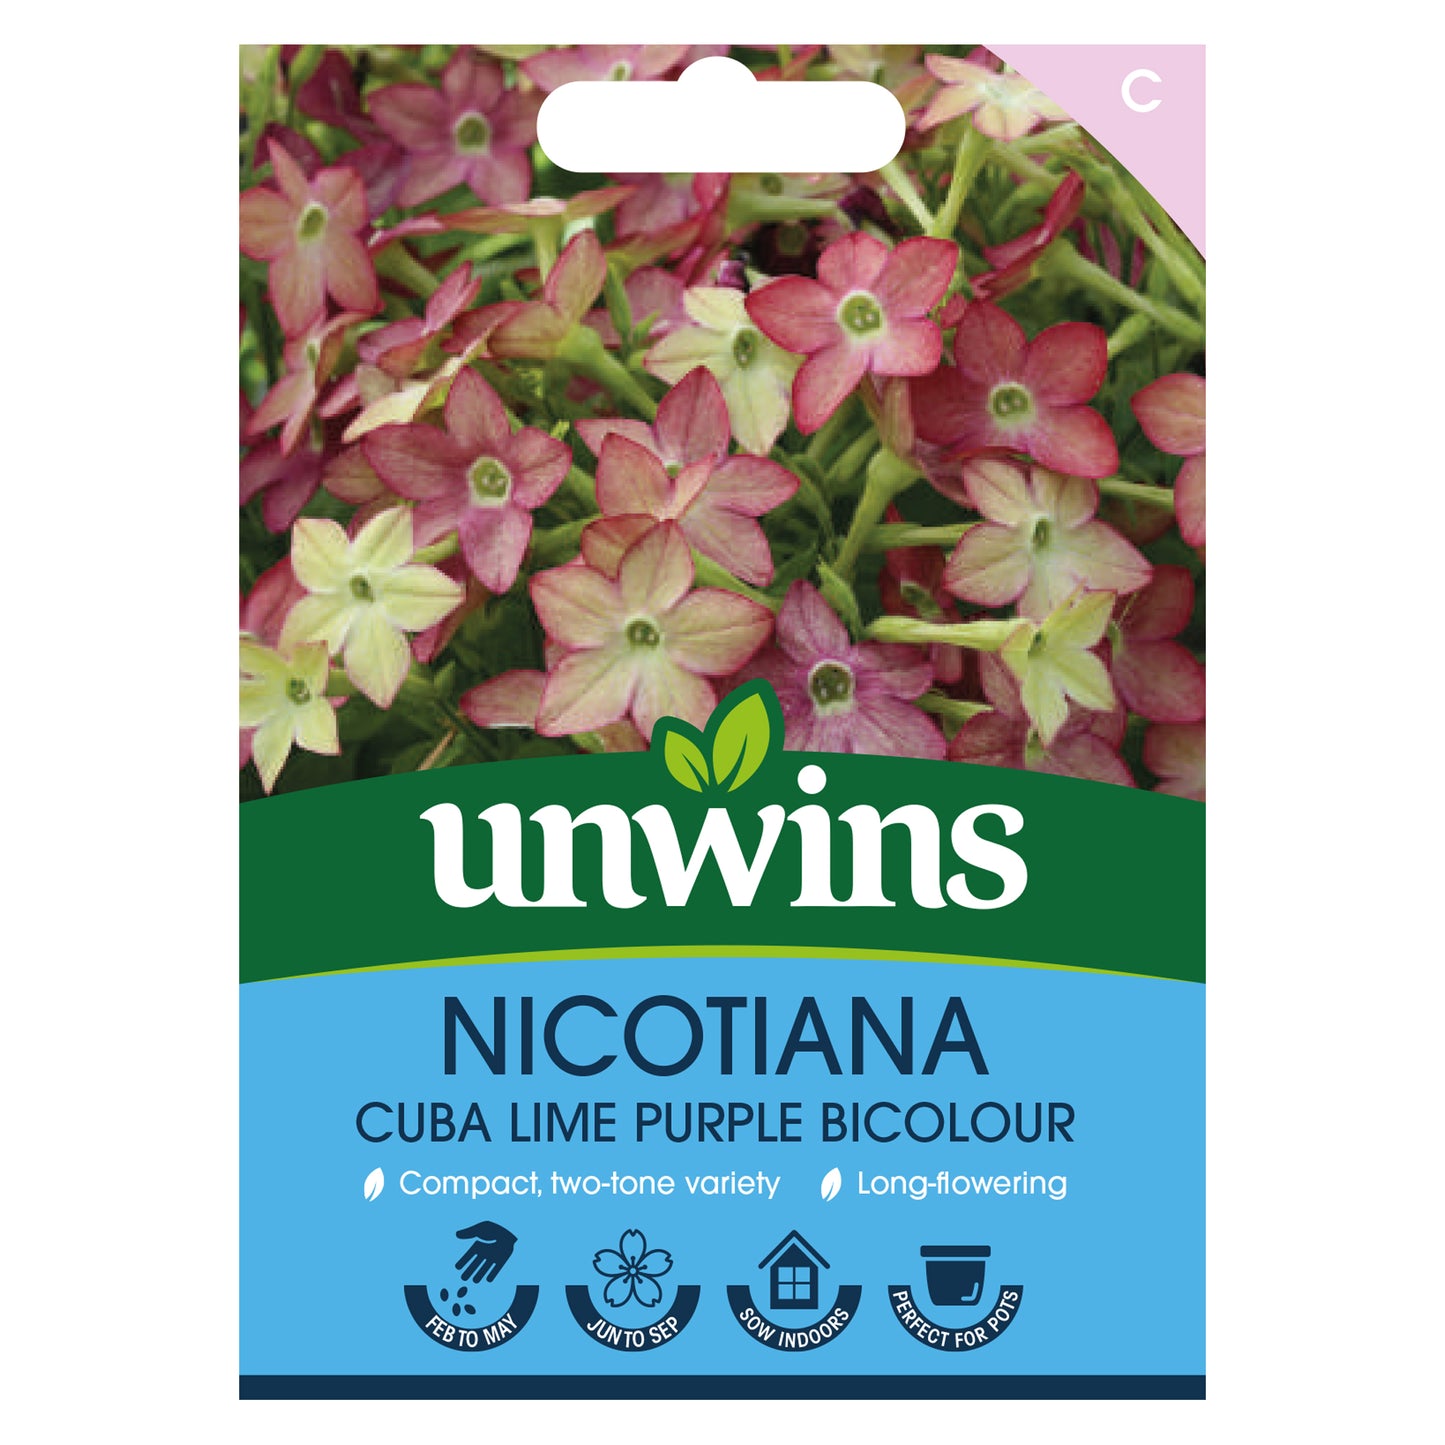 Unwins Nicotiana Cuba Lime Purple Bicolour Seeds front of pack